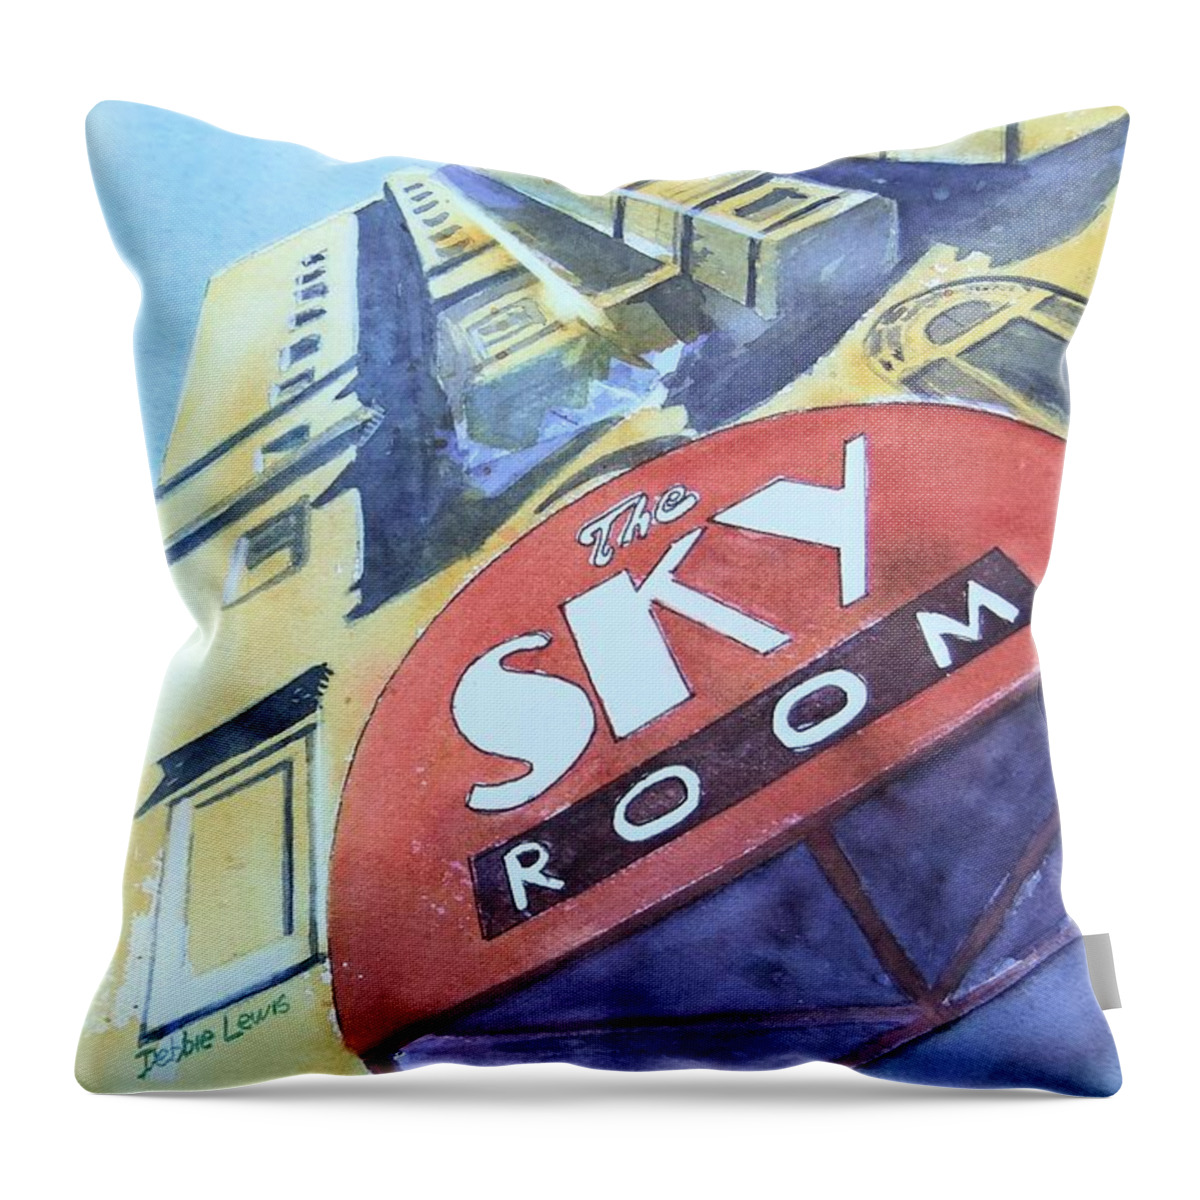 The Sky Room Throw Pillow featuring the painting The Sky Room by Debbie Lewis